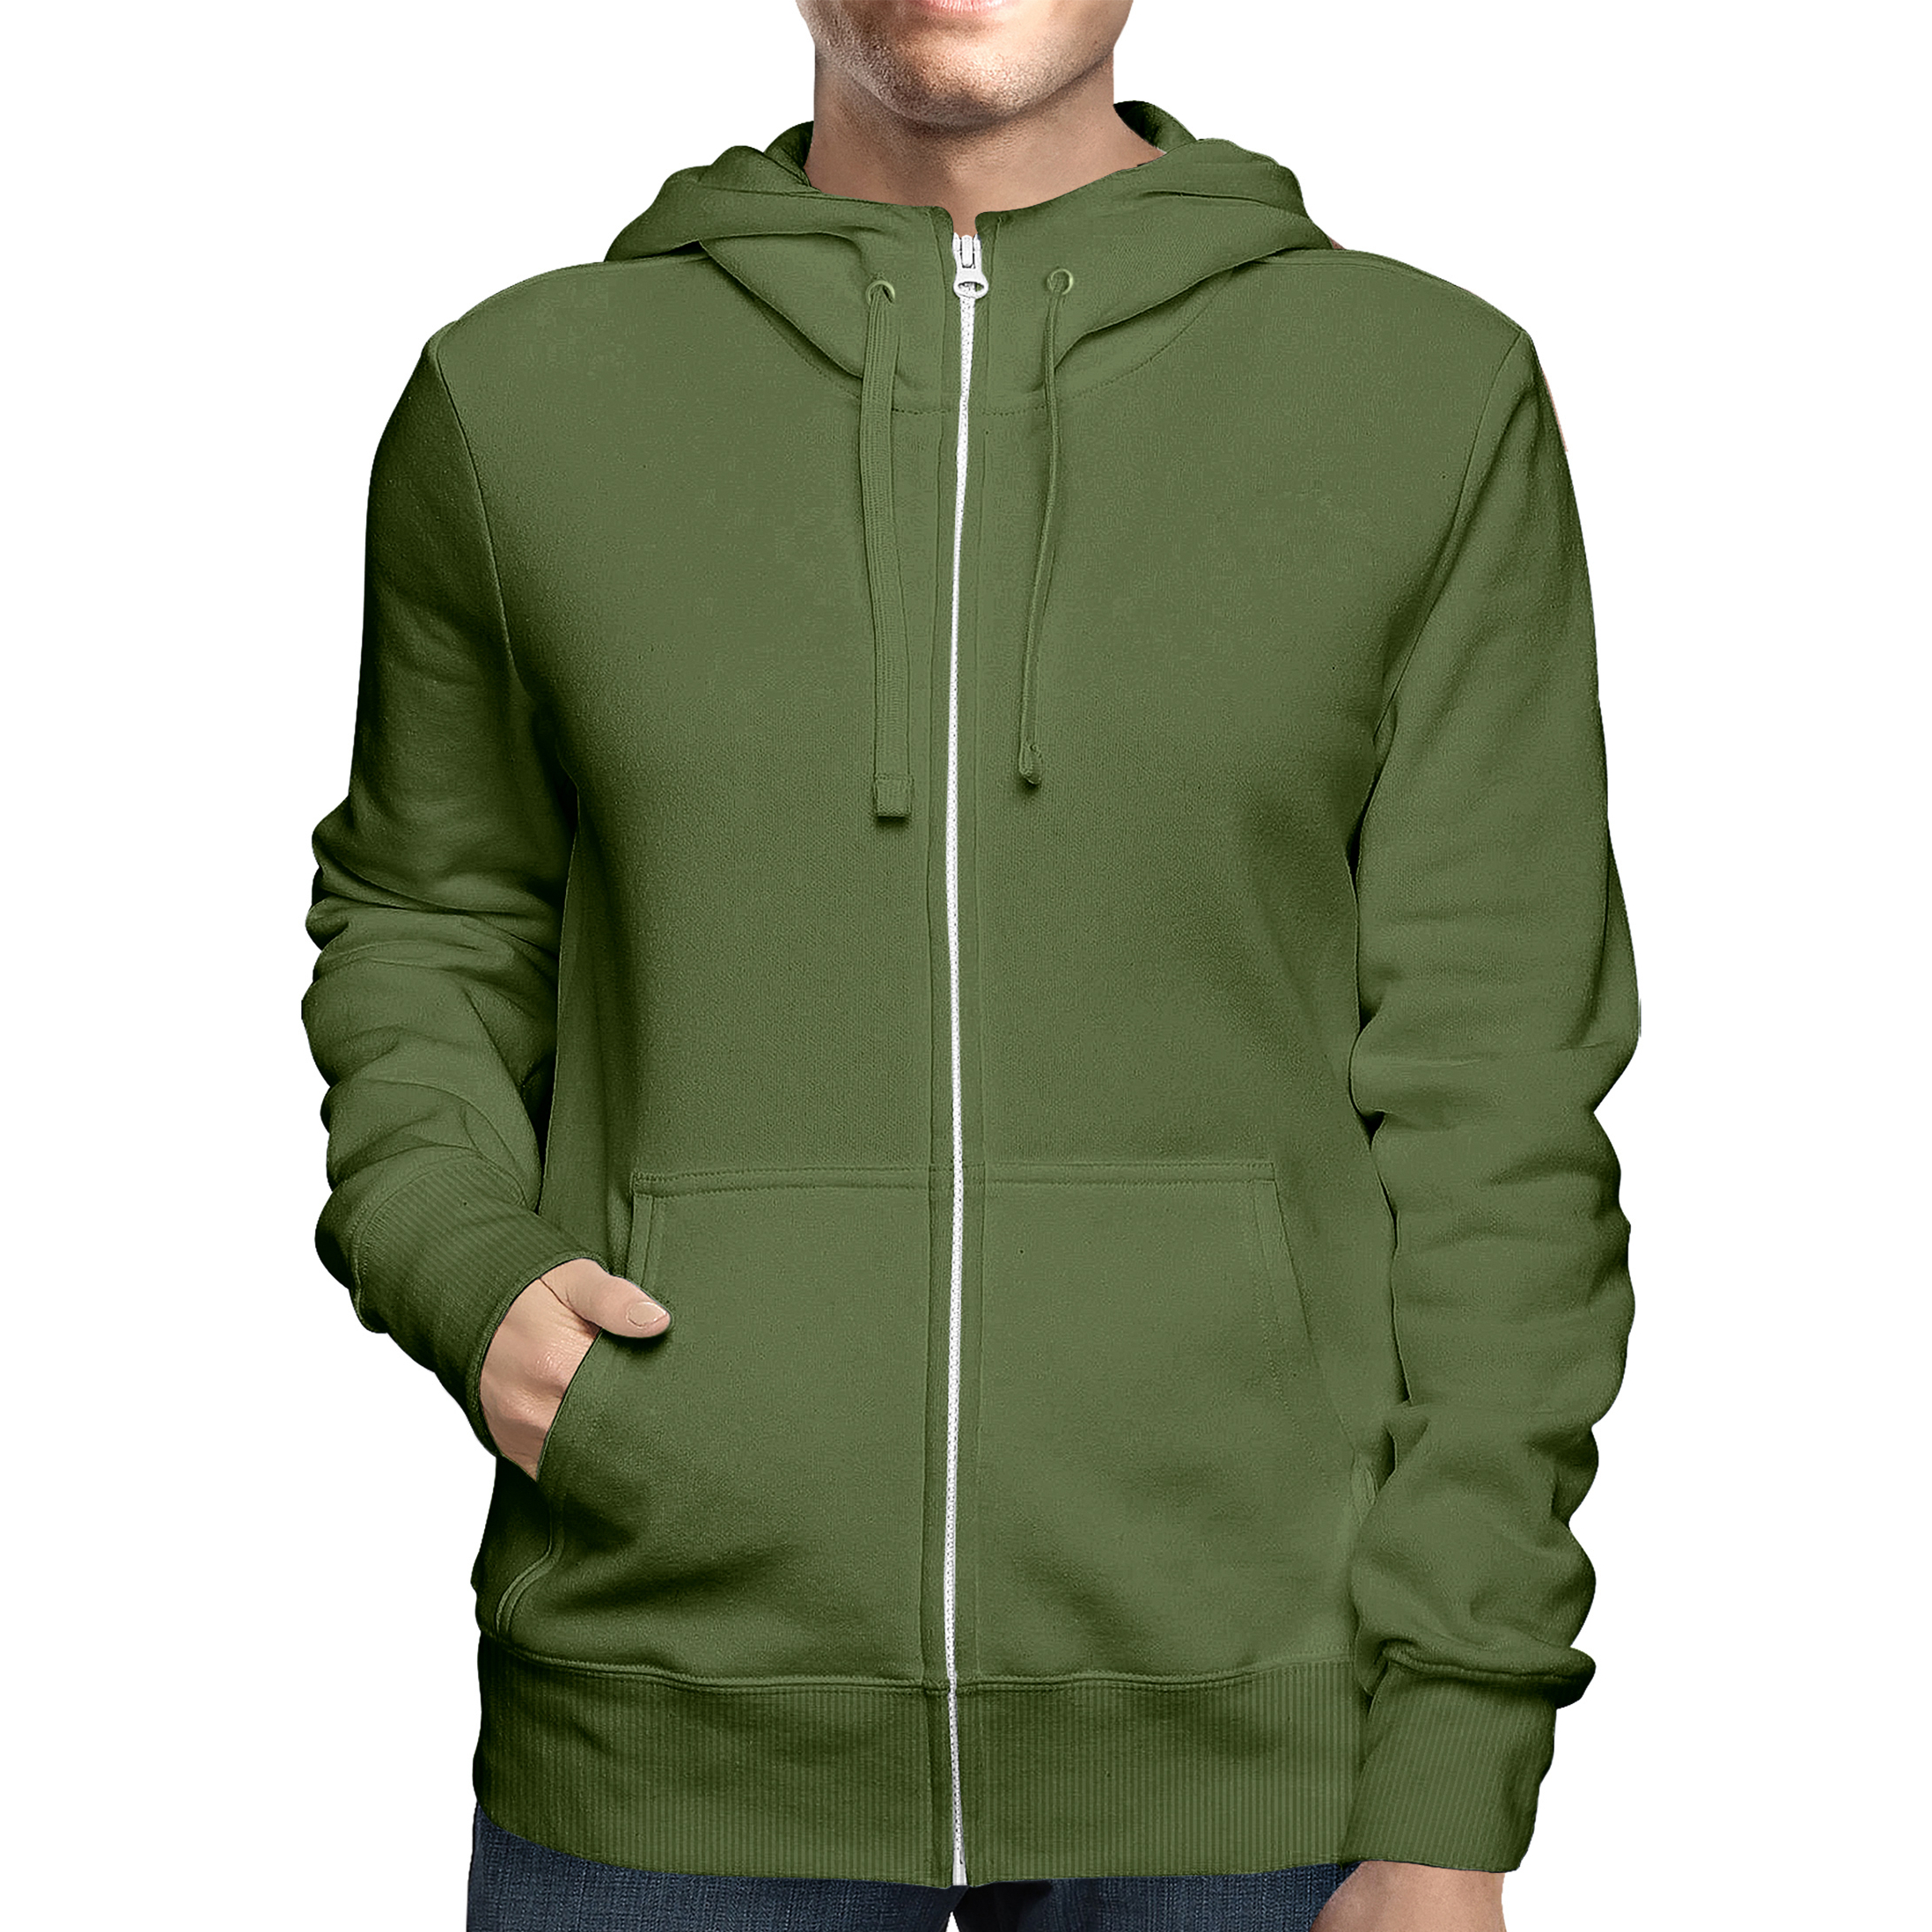 2-Pack: Men's Full Zip Up Fleece-Lined Hoodie Sweatshirt (Big & Tall Size Available) - Olive, Large